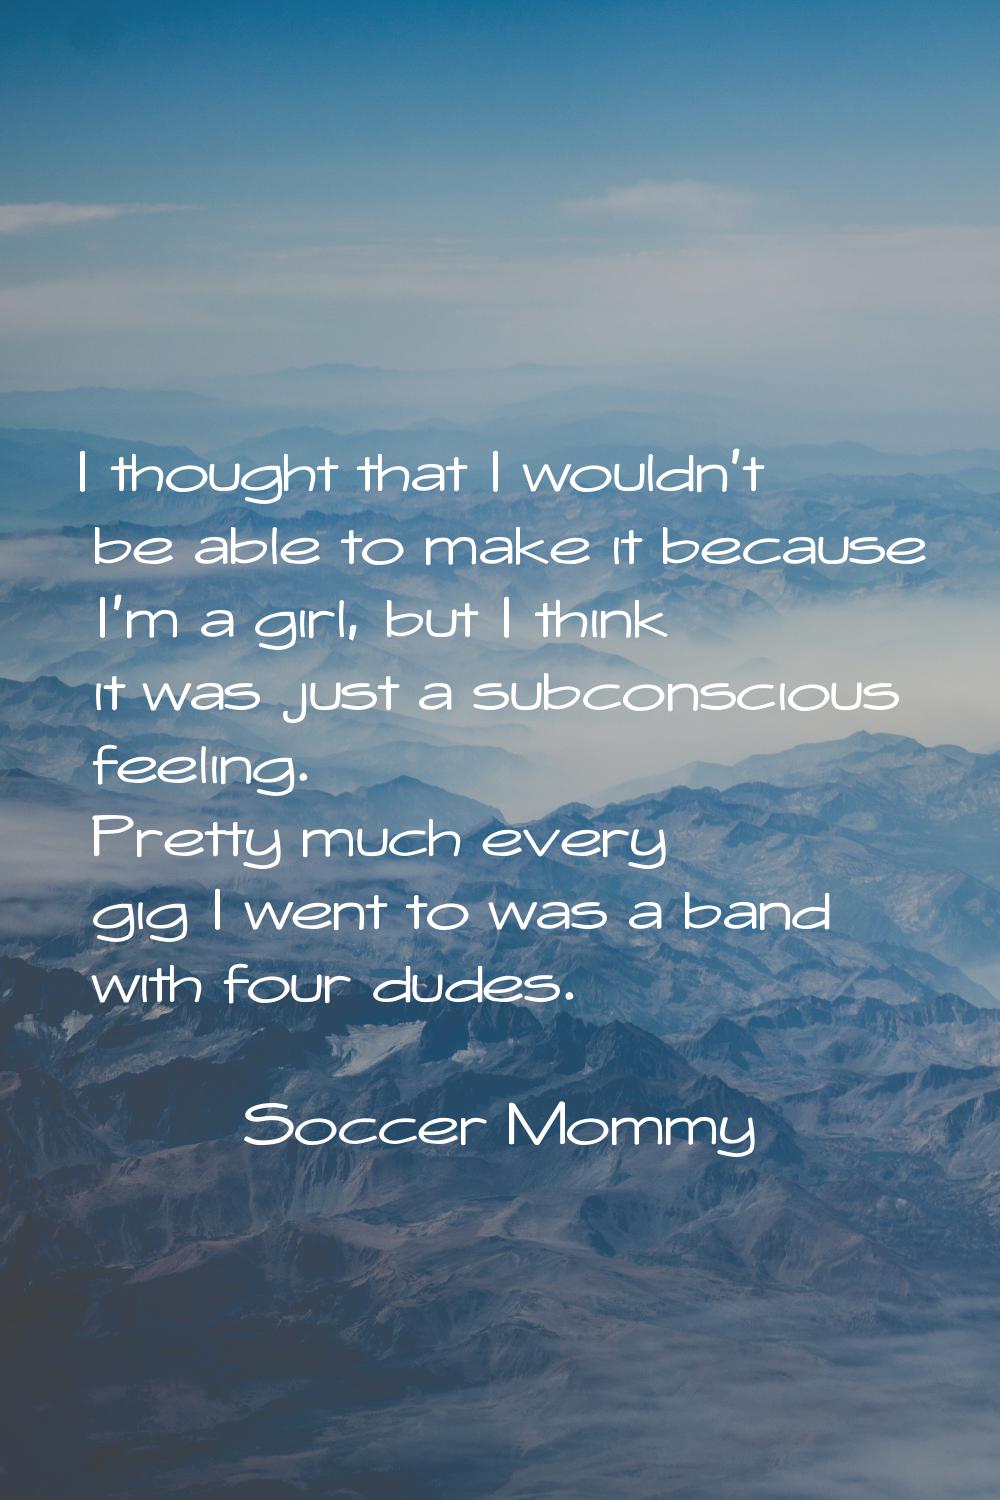 I thought that I wouldn't be able to make it because I'm a girl, but I think it was just a subconsc